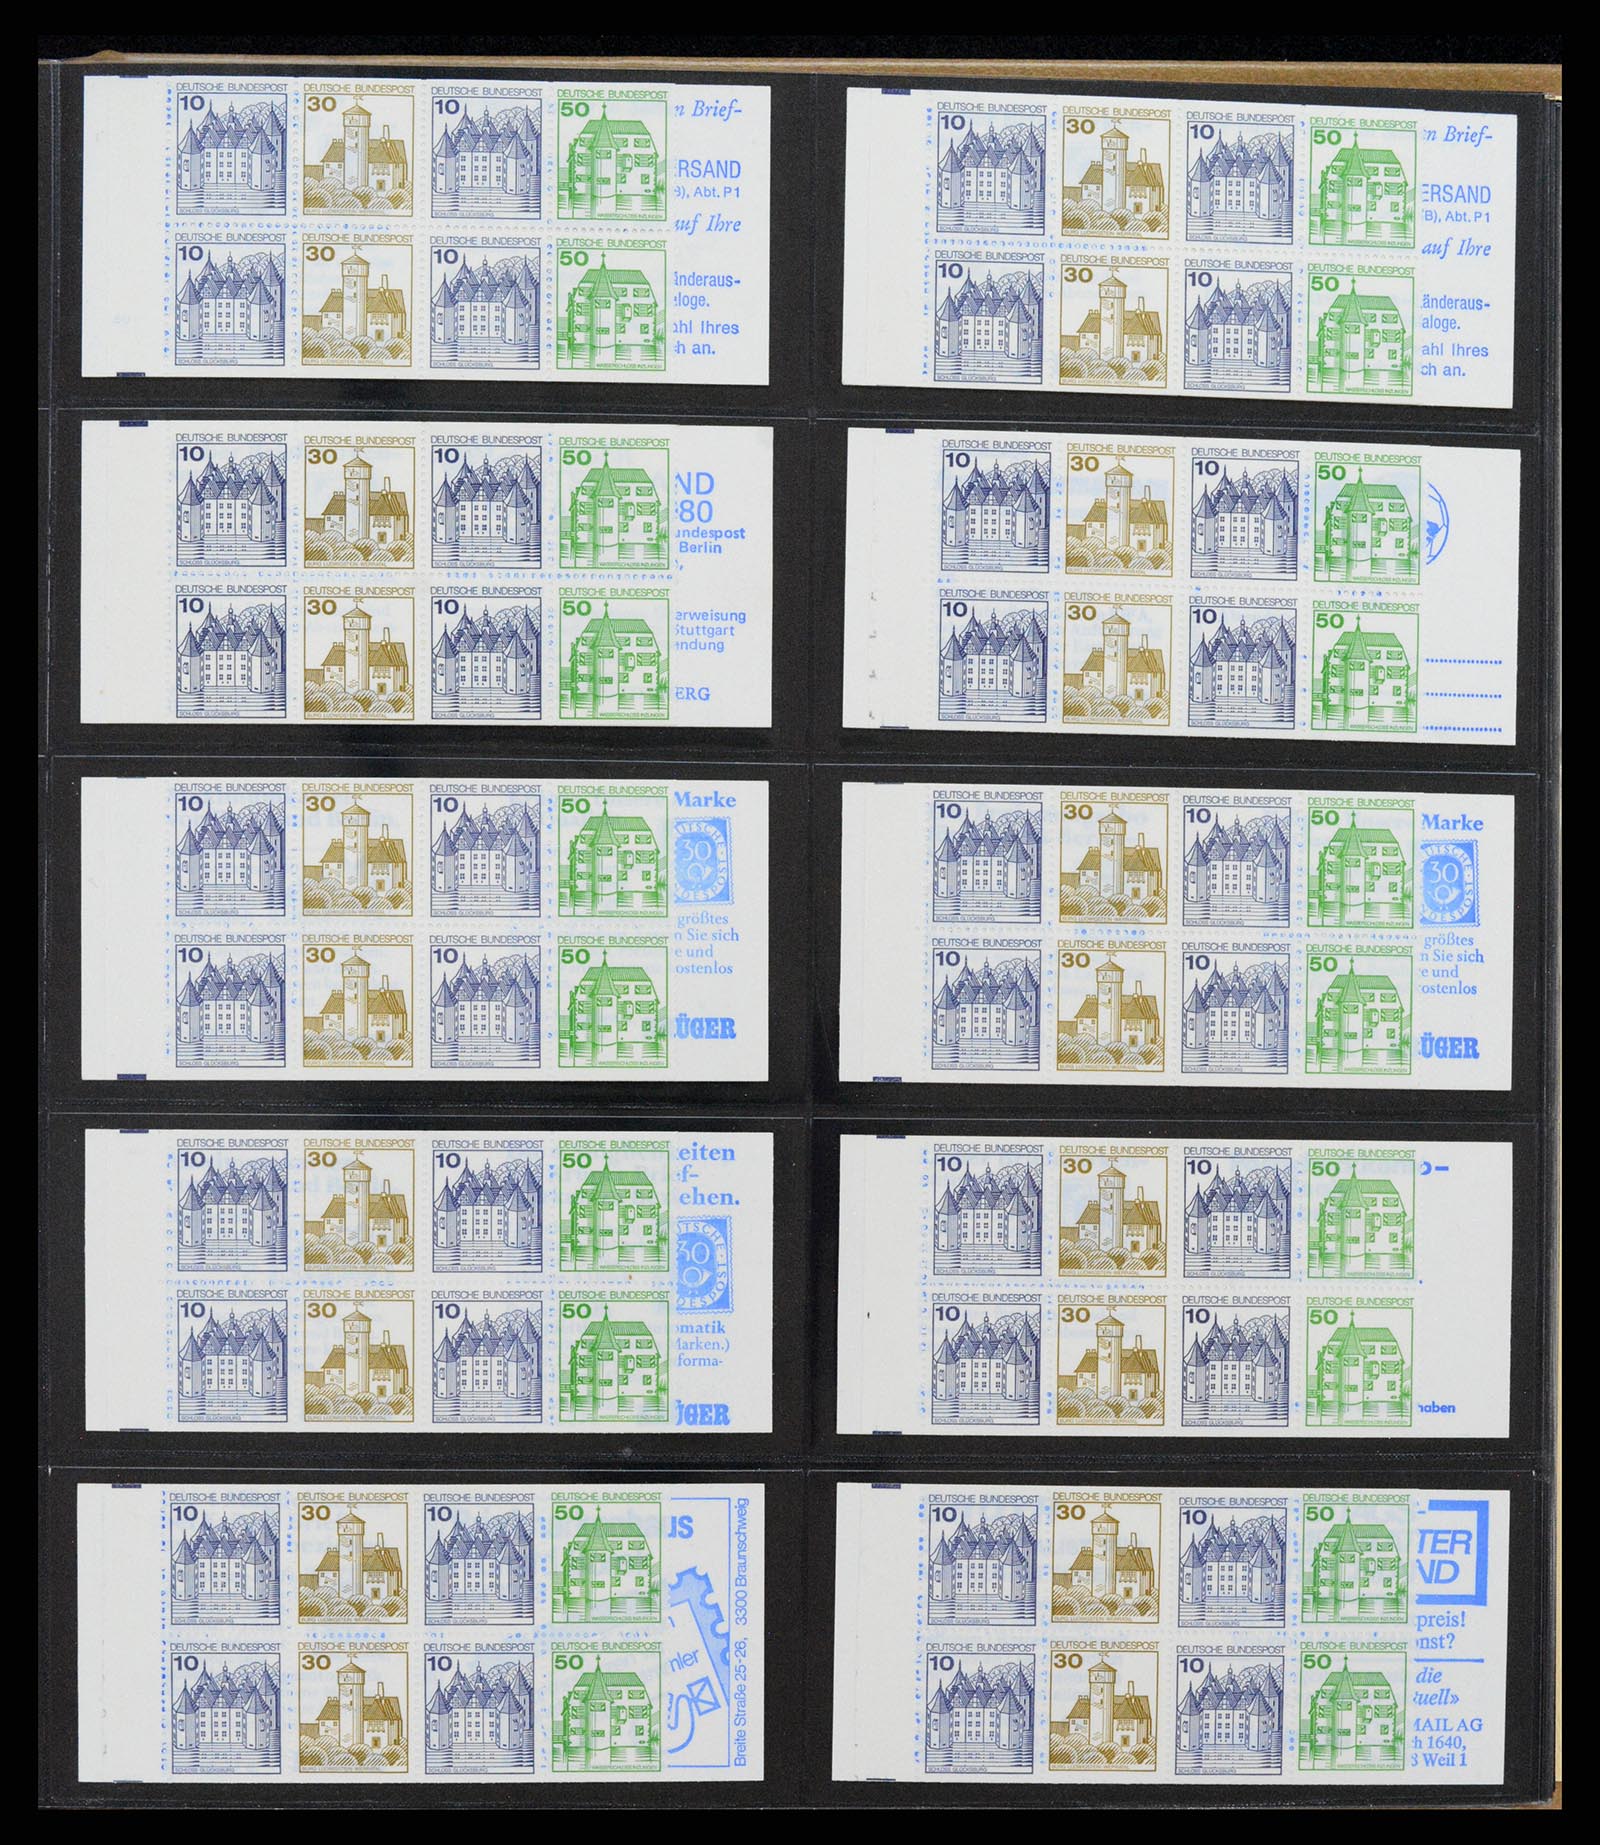 37365 029 - Stamp collection 37365 Bundespost stamp booklets 1951-2001.